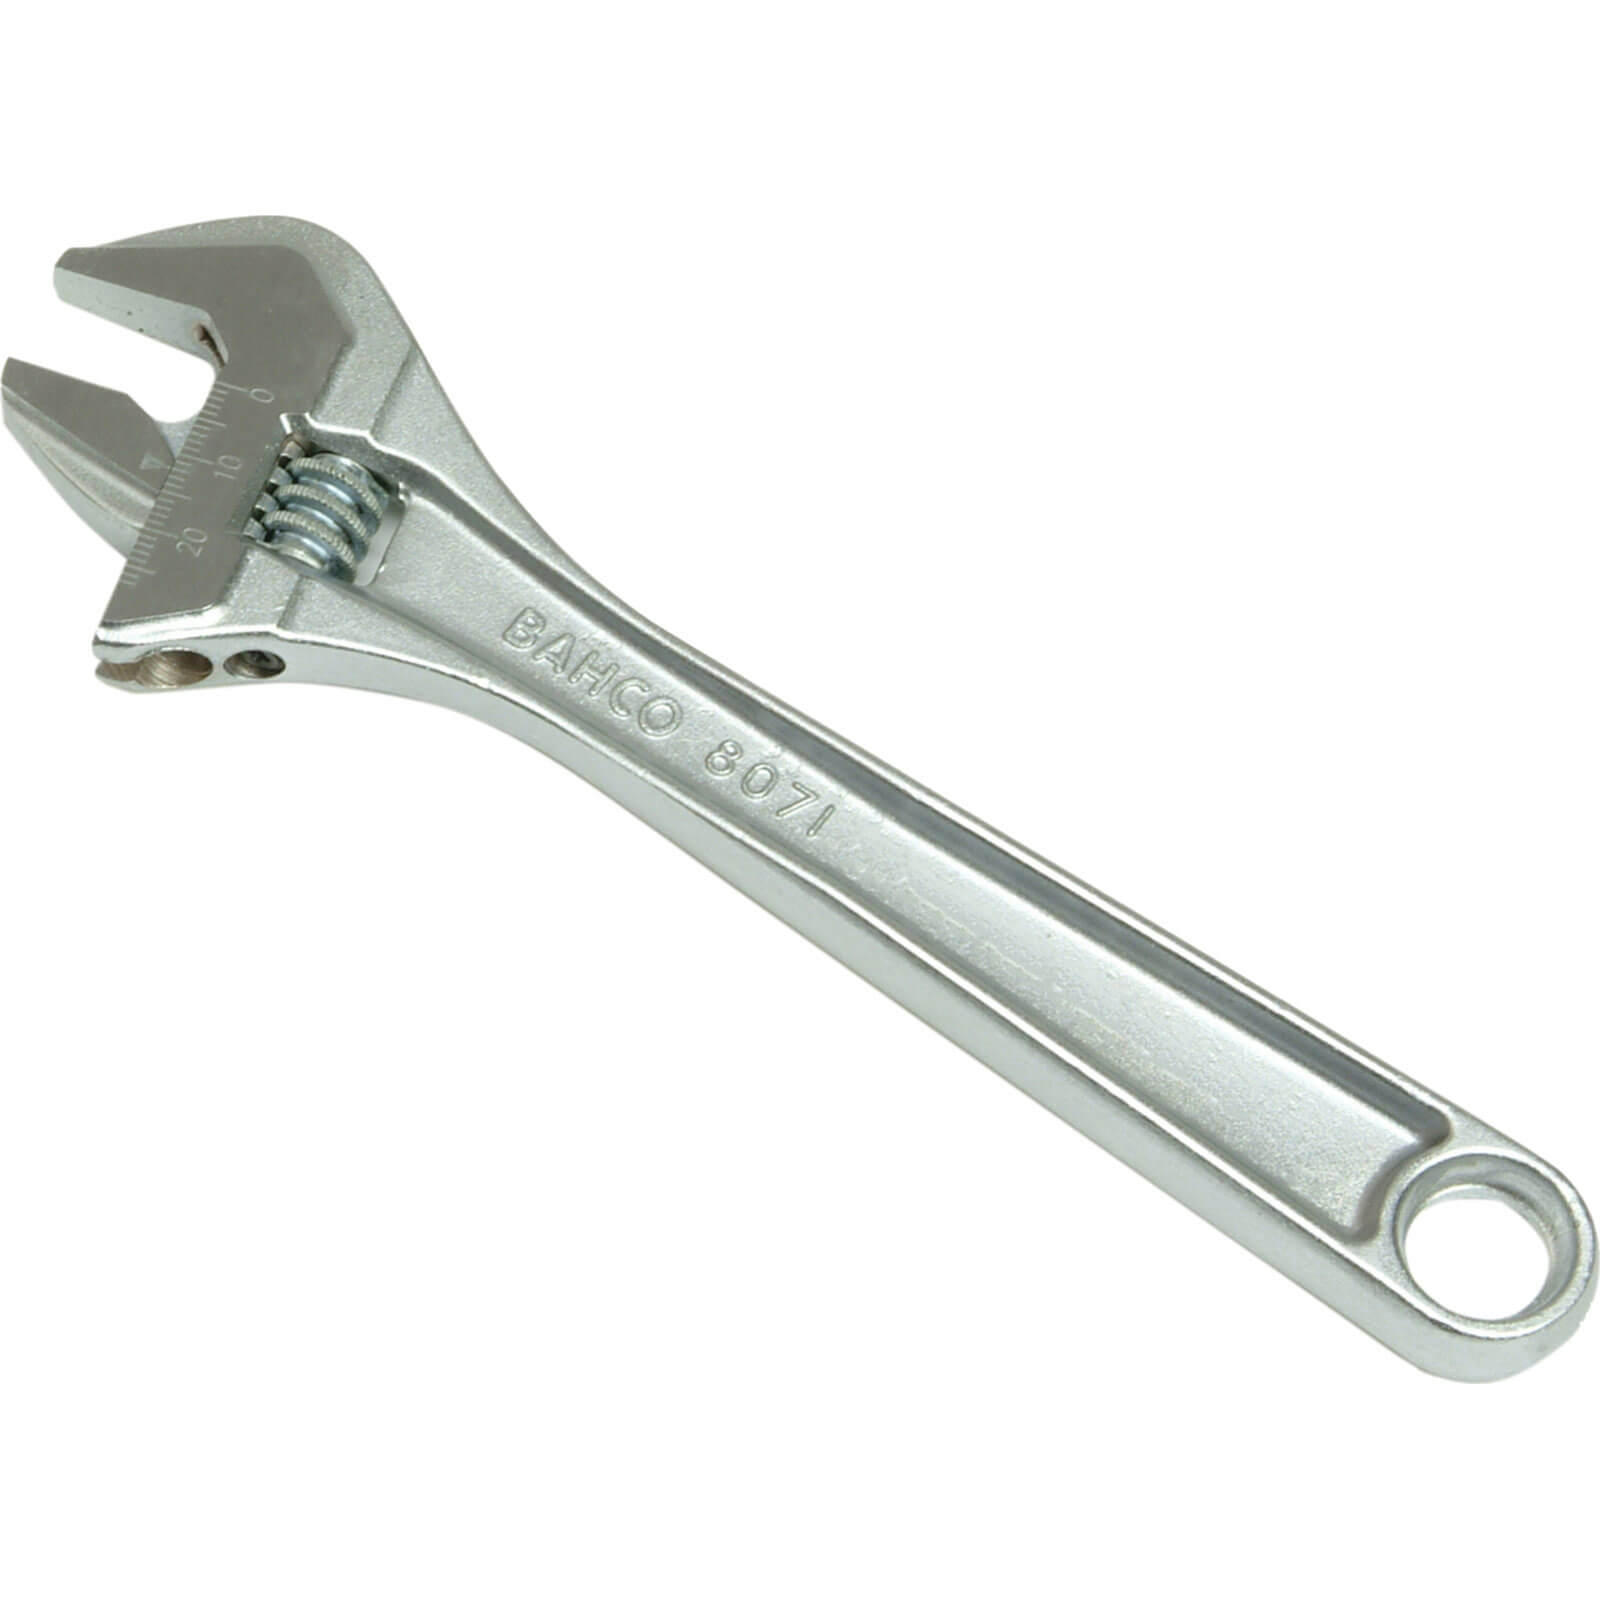 Photo of Bahco 80 Series Adjustable Spanner 375mm